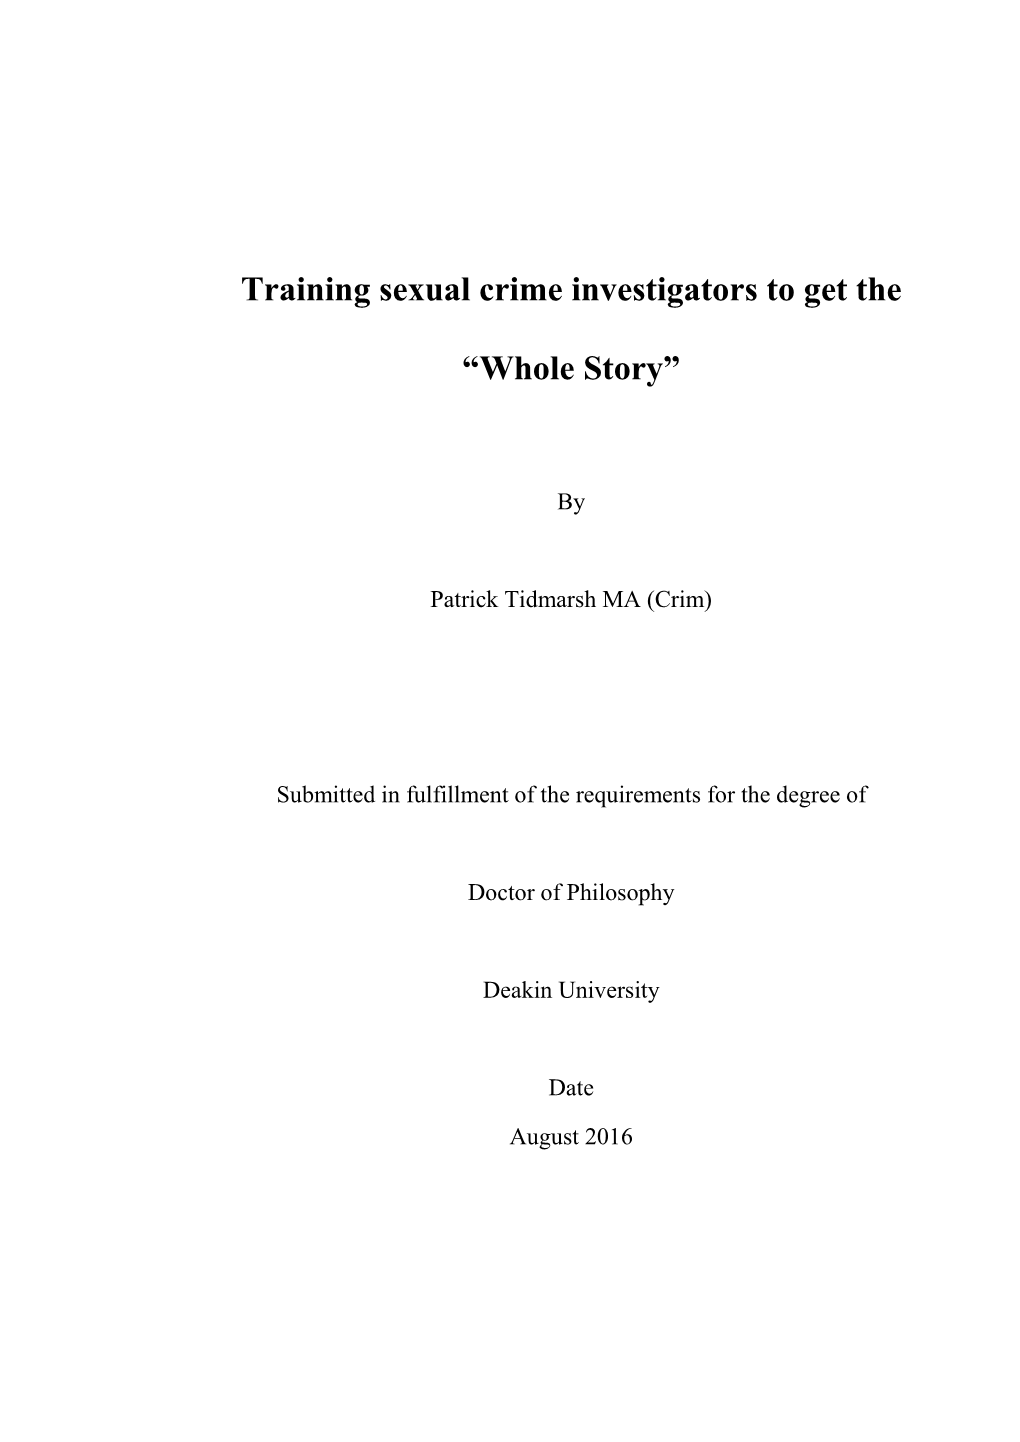 Training Sexual Crime Investigators to Get the “Whole Story”